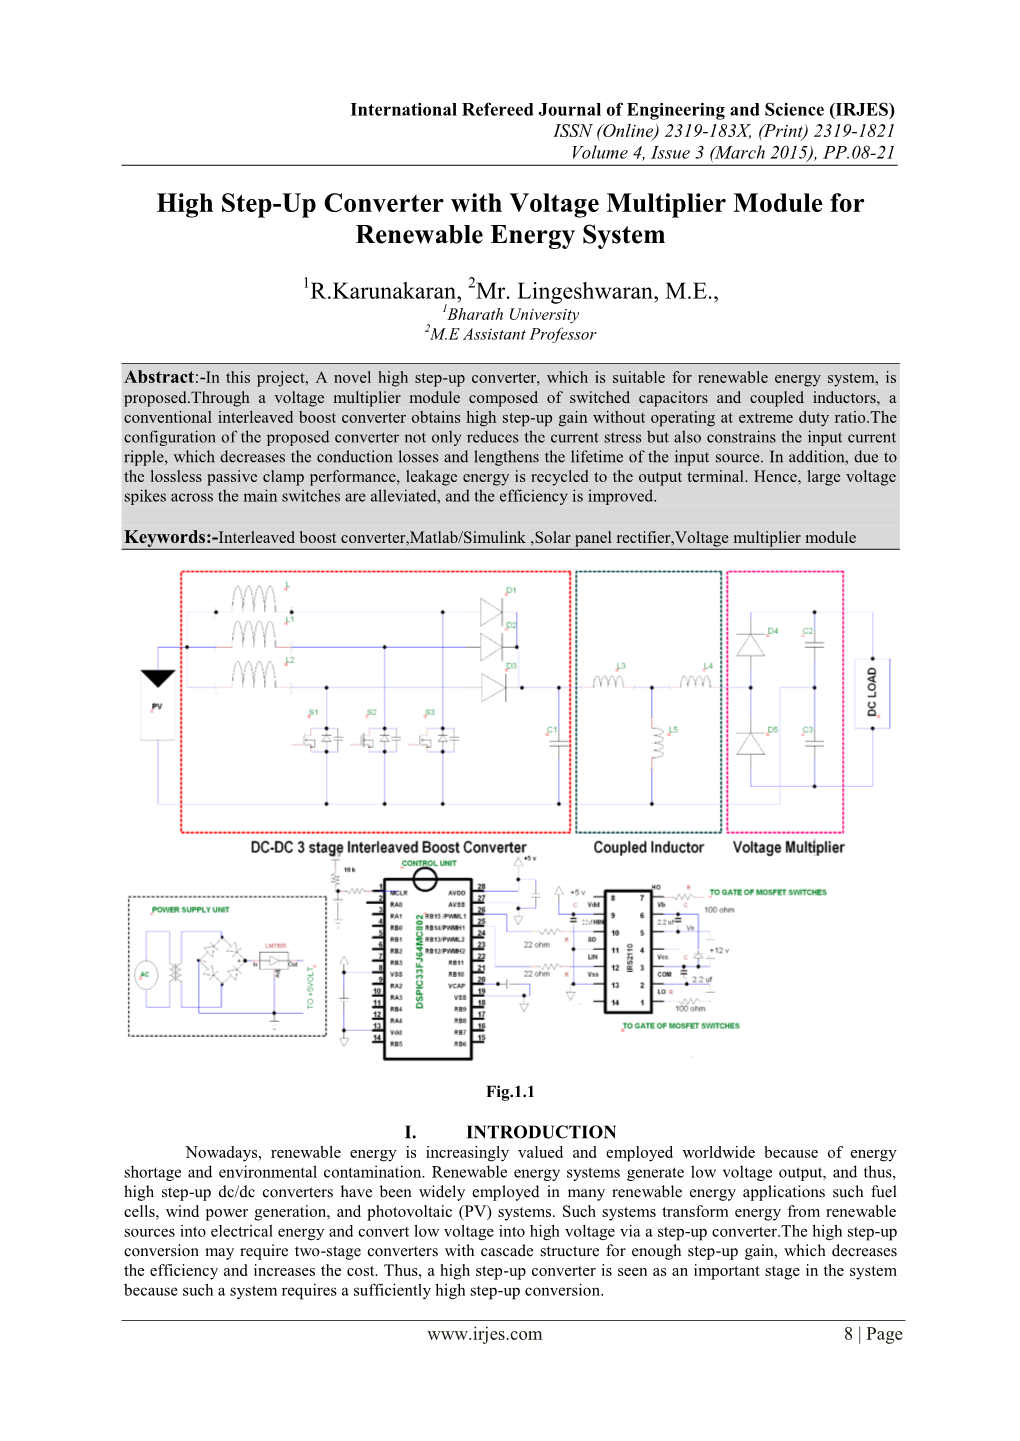 High Step-Up Converter with Voltage Multiplier Module for Renewable Energy System